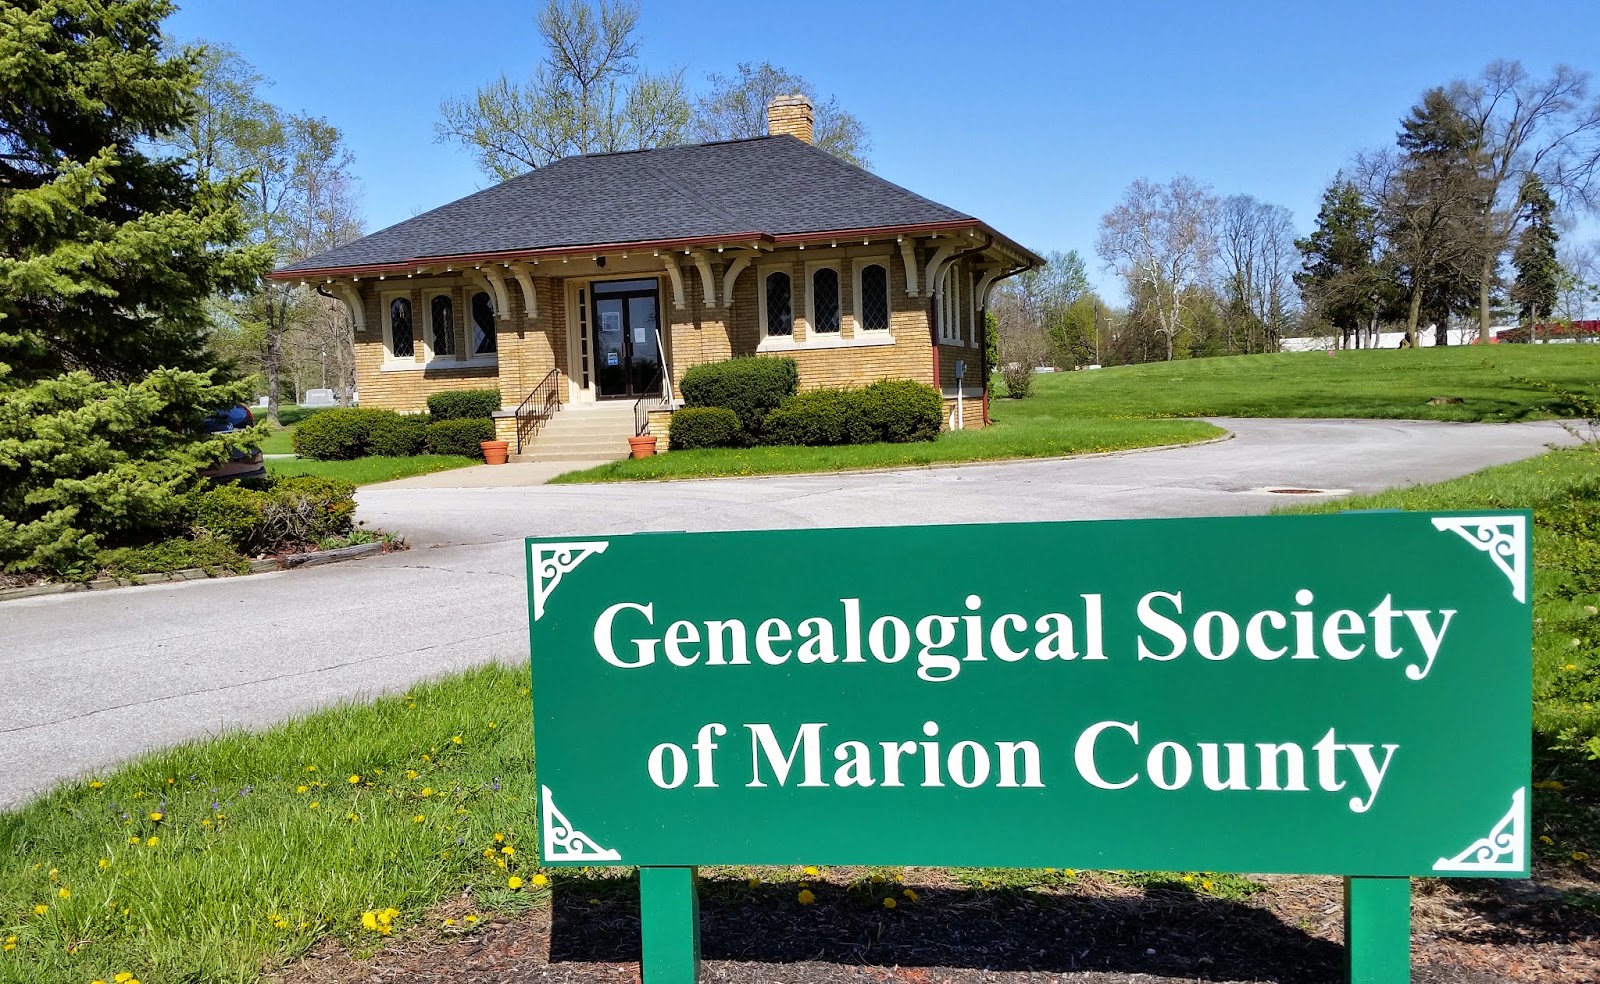 MARION COUNTY GENEALOGICAL SOCIETY